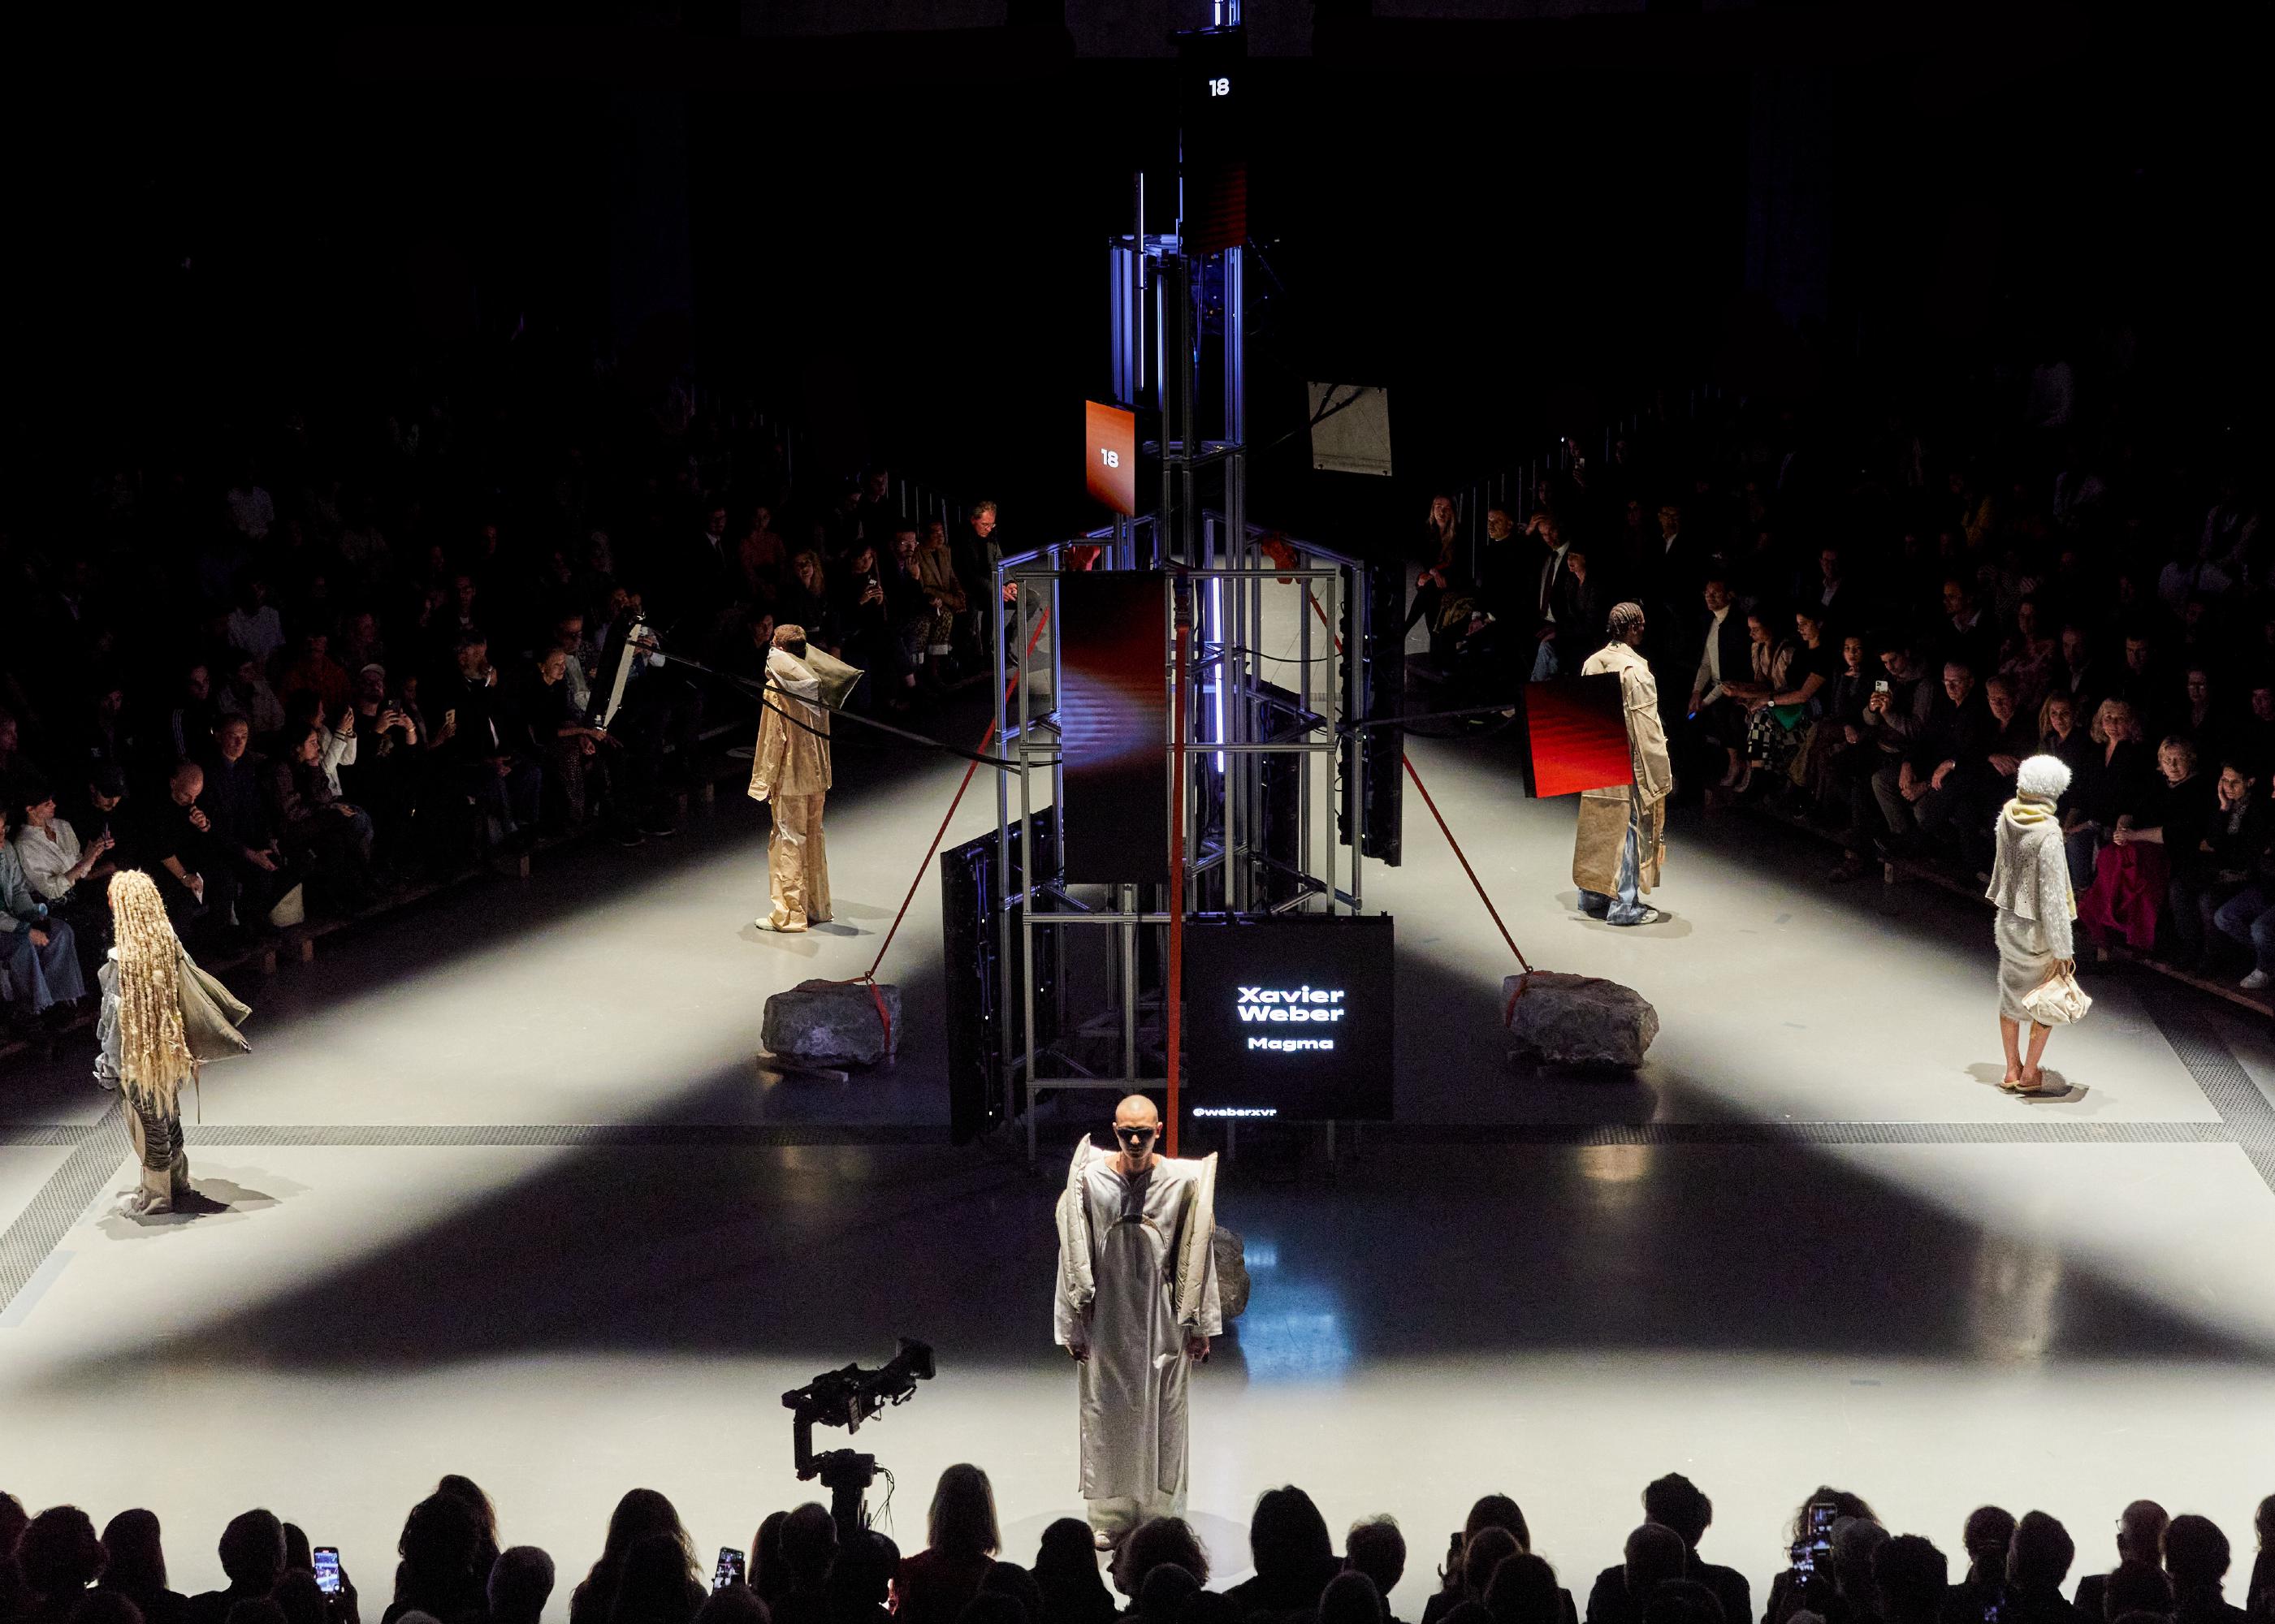 https://scenesdenuit.ch/media/pages/home/83b00a7aea-1700819041/head-geneve-department-of-interior-architecture-digital-totem-head-geneve-fashion-show-2.jpg loading=